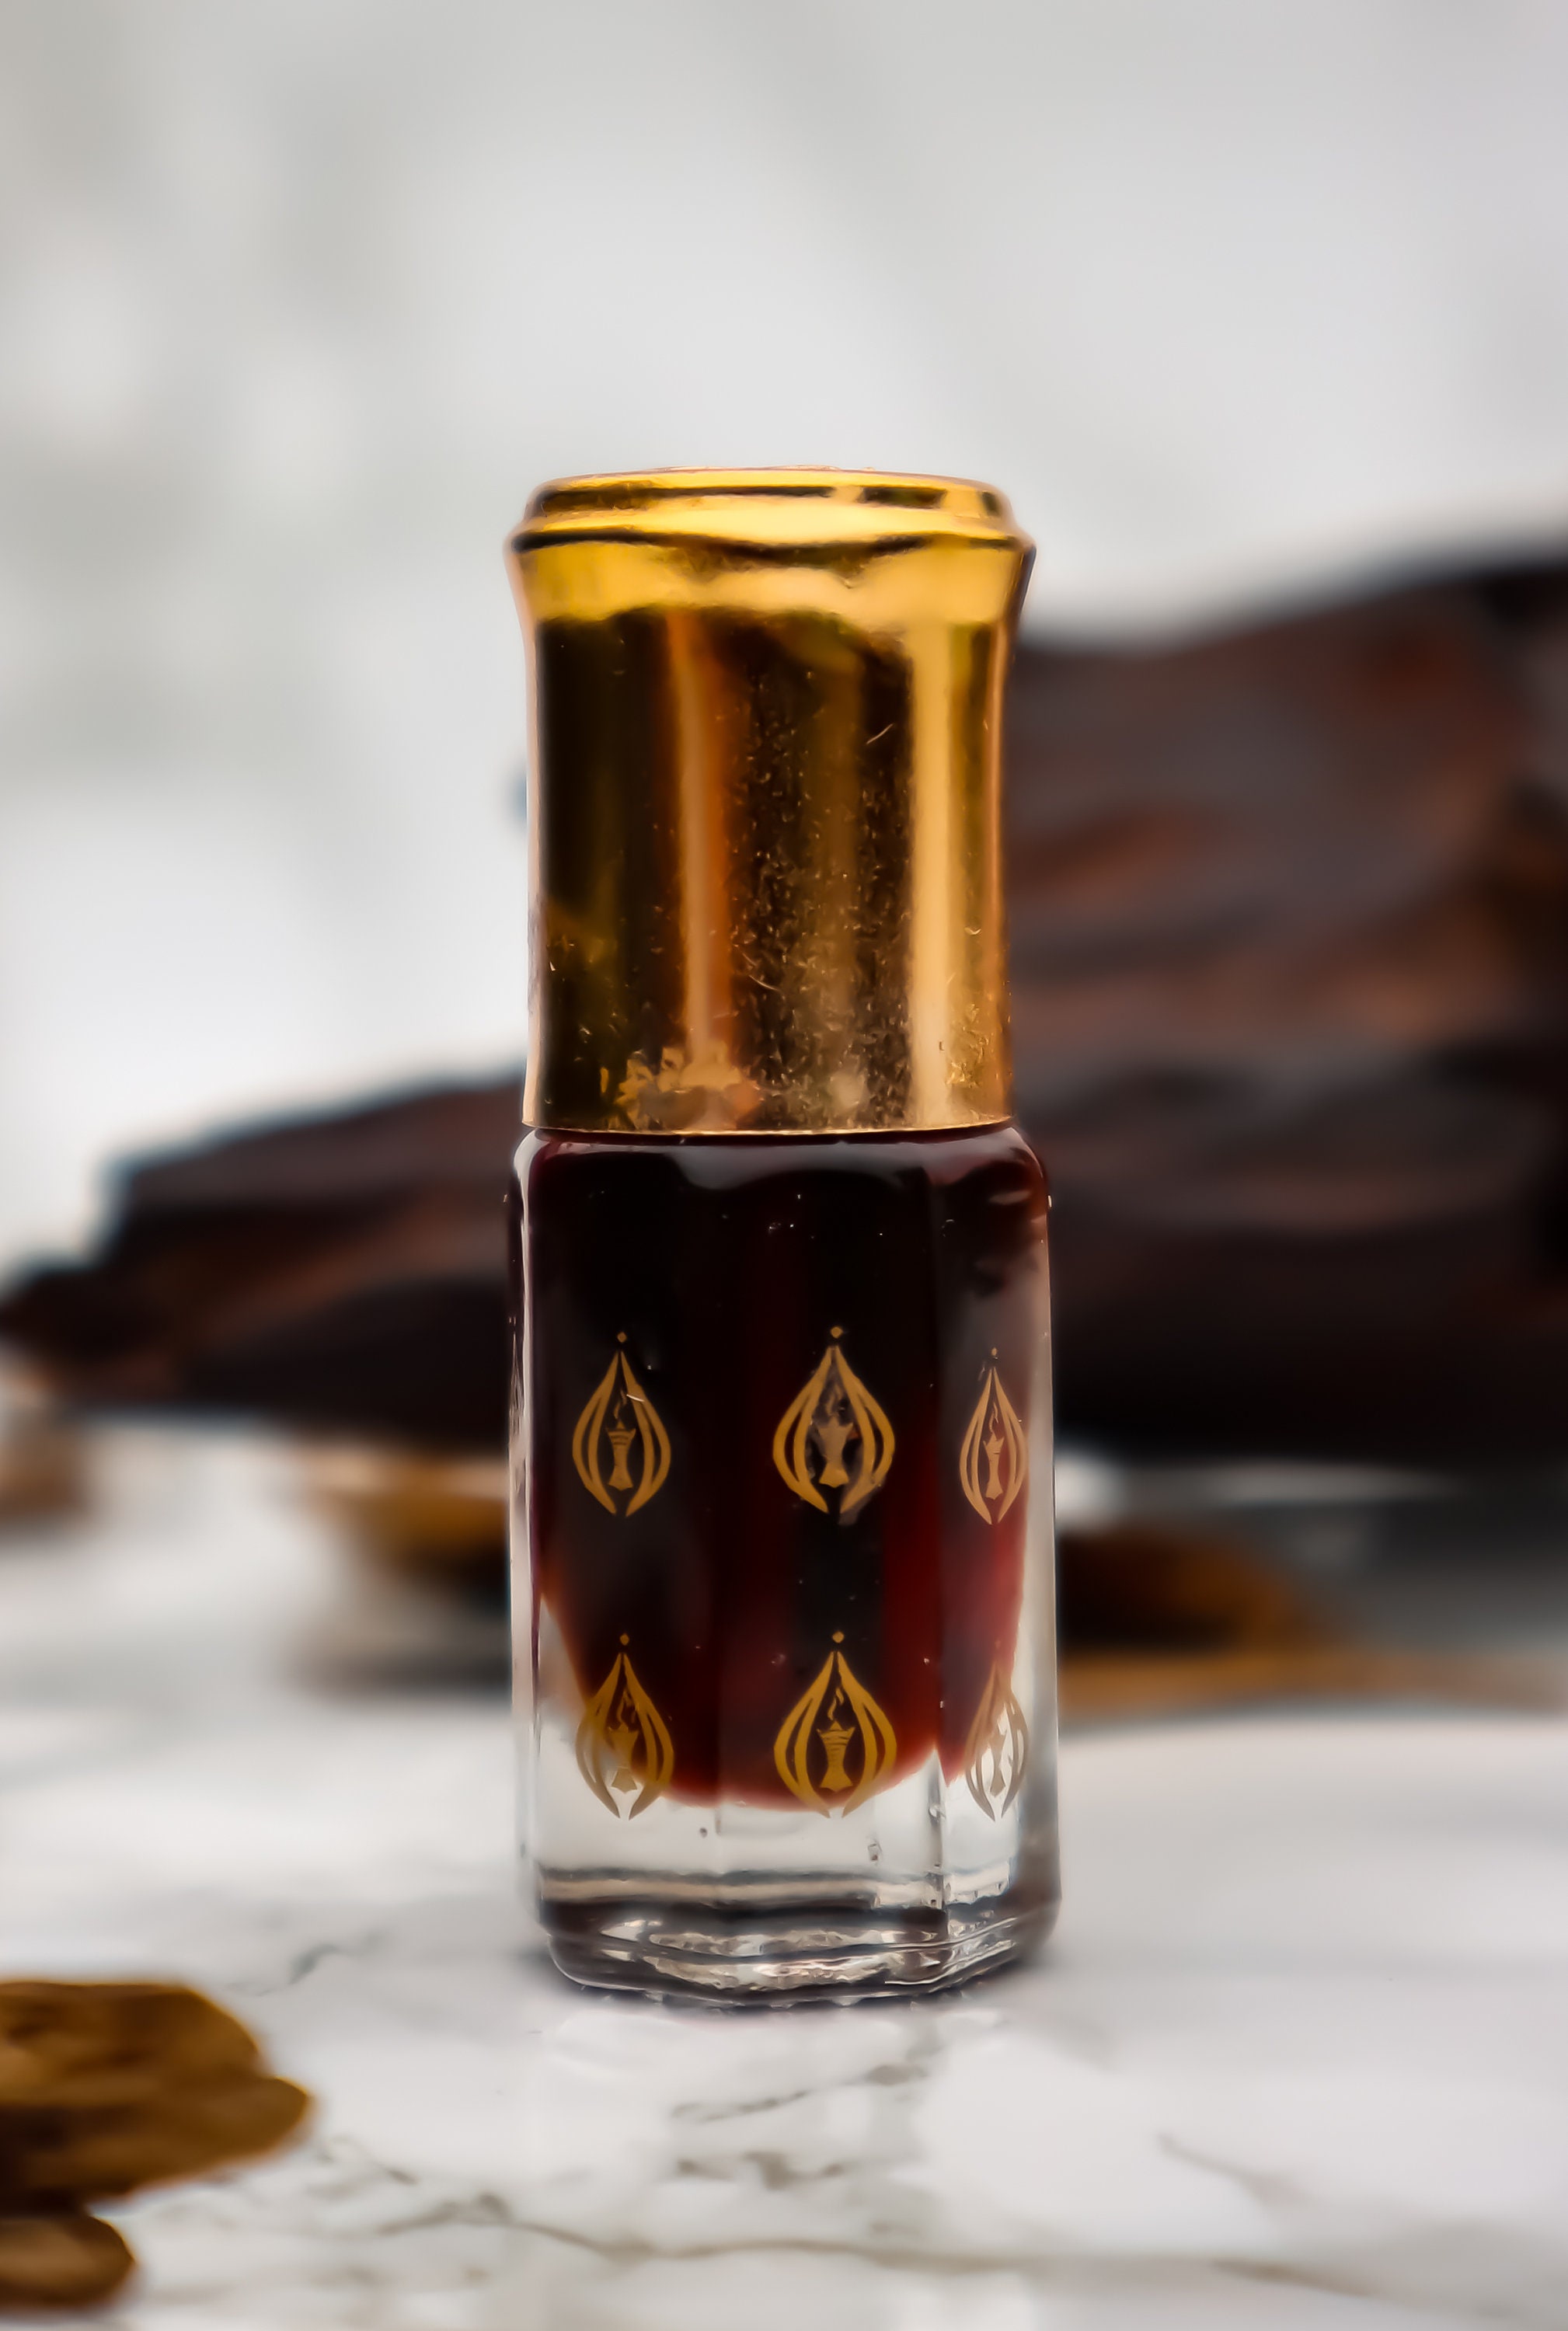 10ml/bottle Authentic Natural Cambodia Oud Pure Essential Oil home aromatic  Aroma Diffuser gift Oudh wood perfume - AliExpress